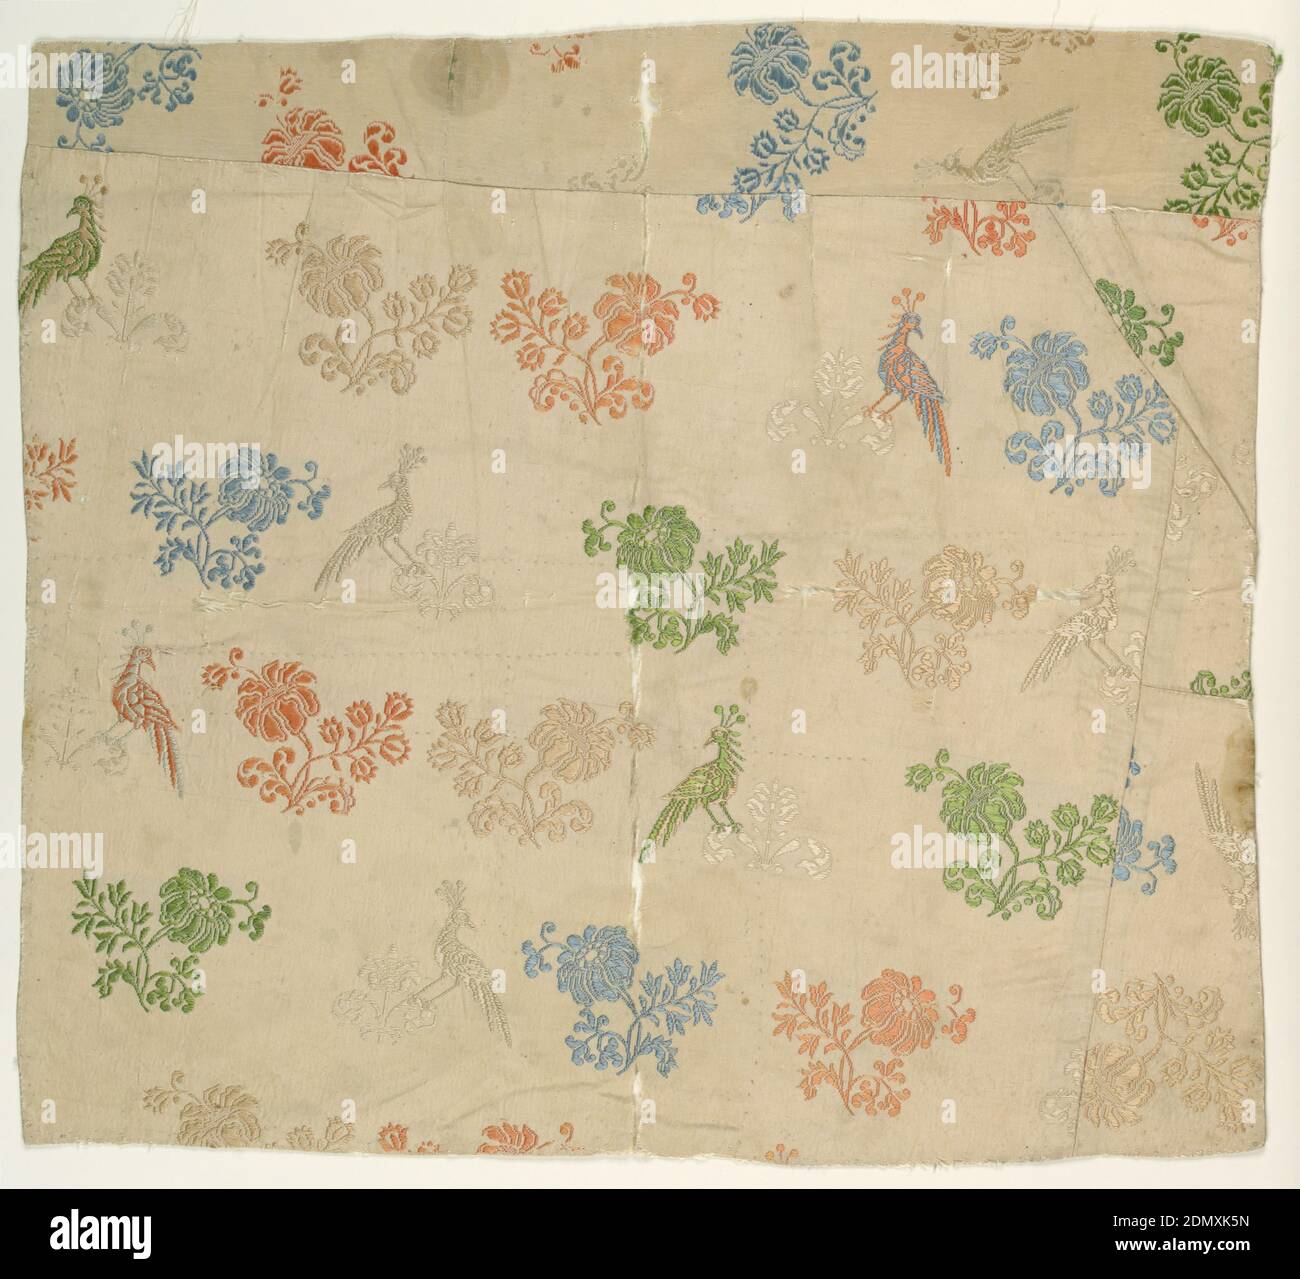 Fragment, Medium: silk Technique: plain weave with discontinuous supplementary wefts (brocading), Polychrome detached floral sprays and birds on cream ground, 17th century, woven textiles, Fragment Stock Photo